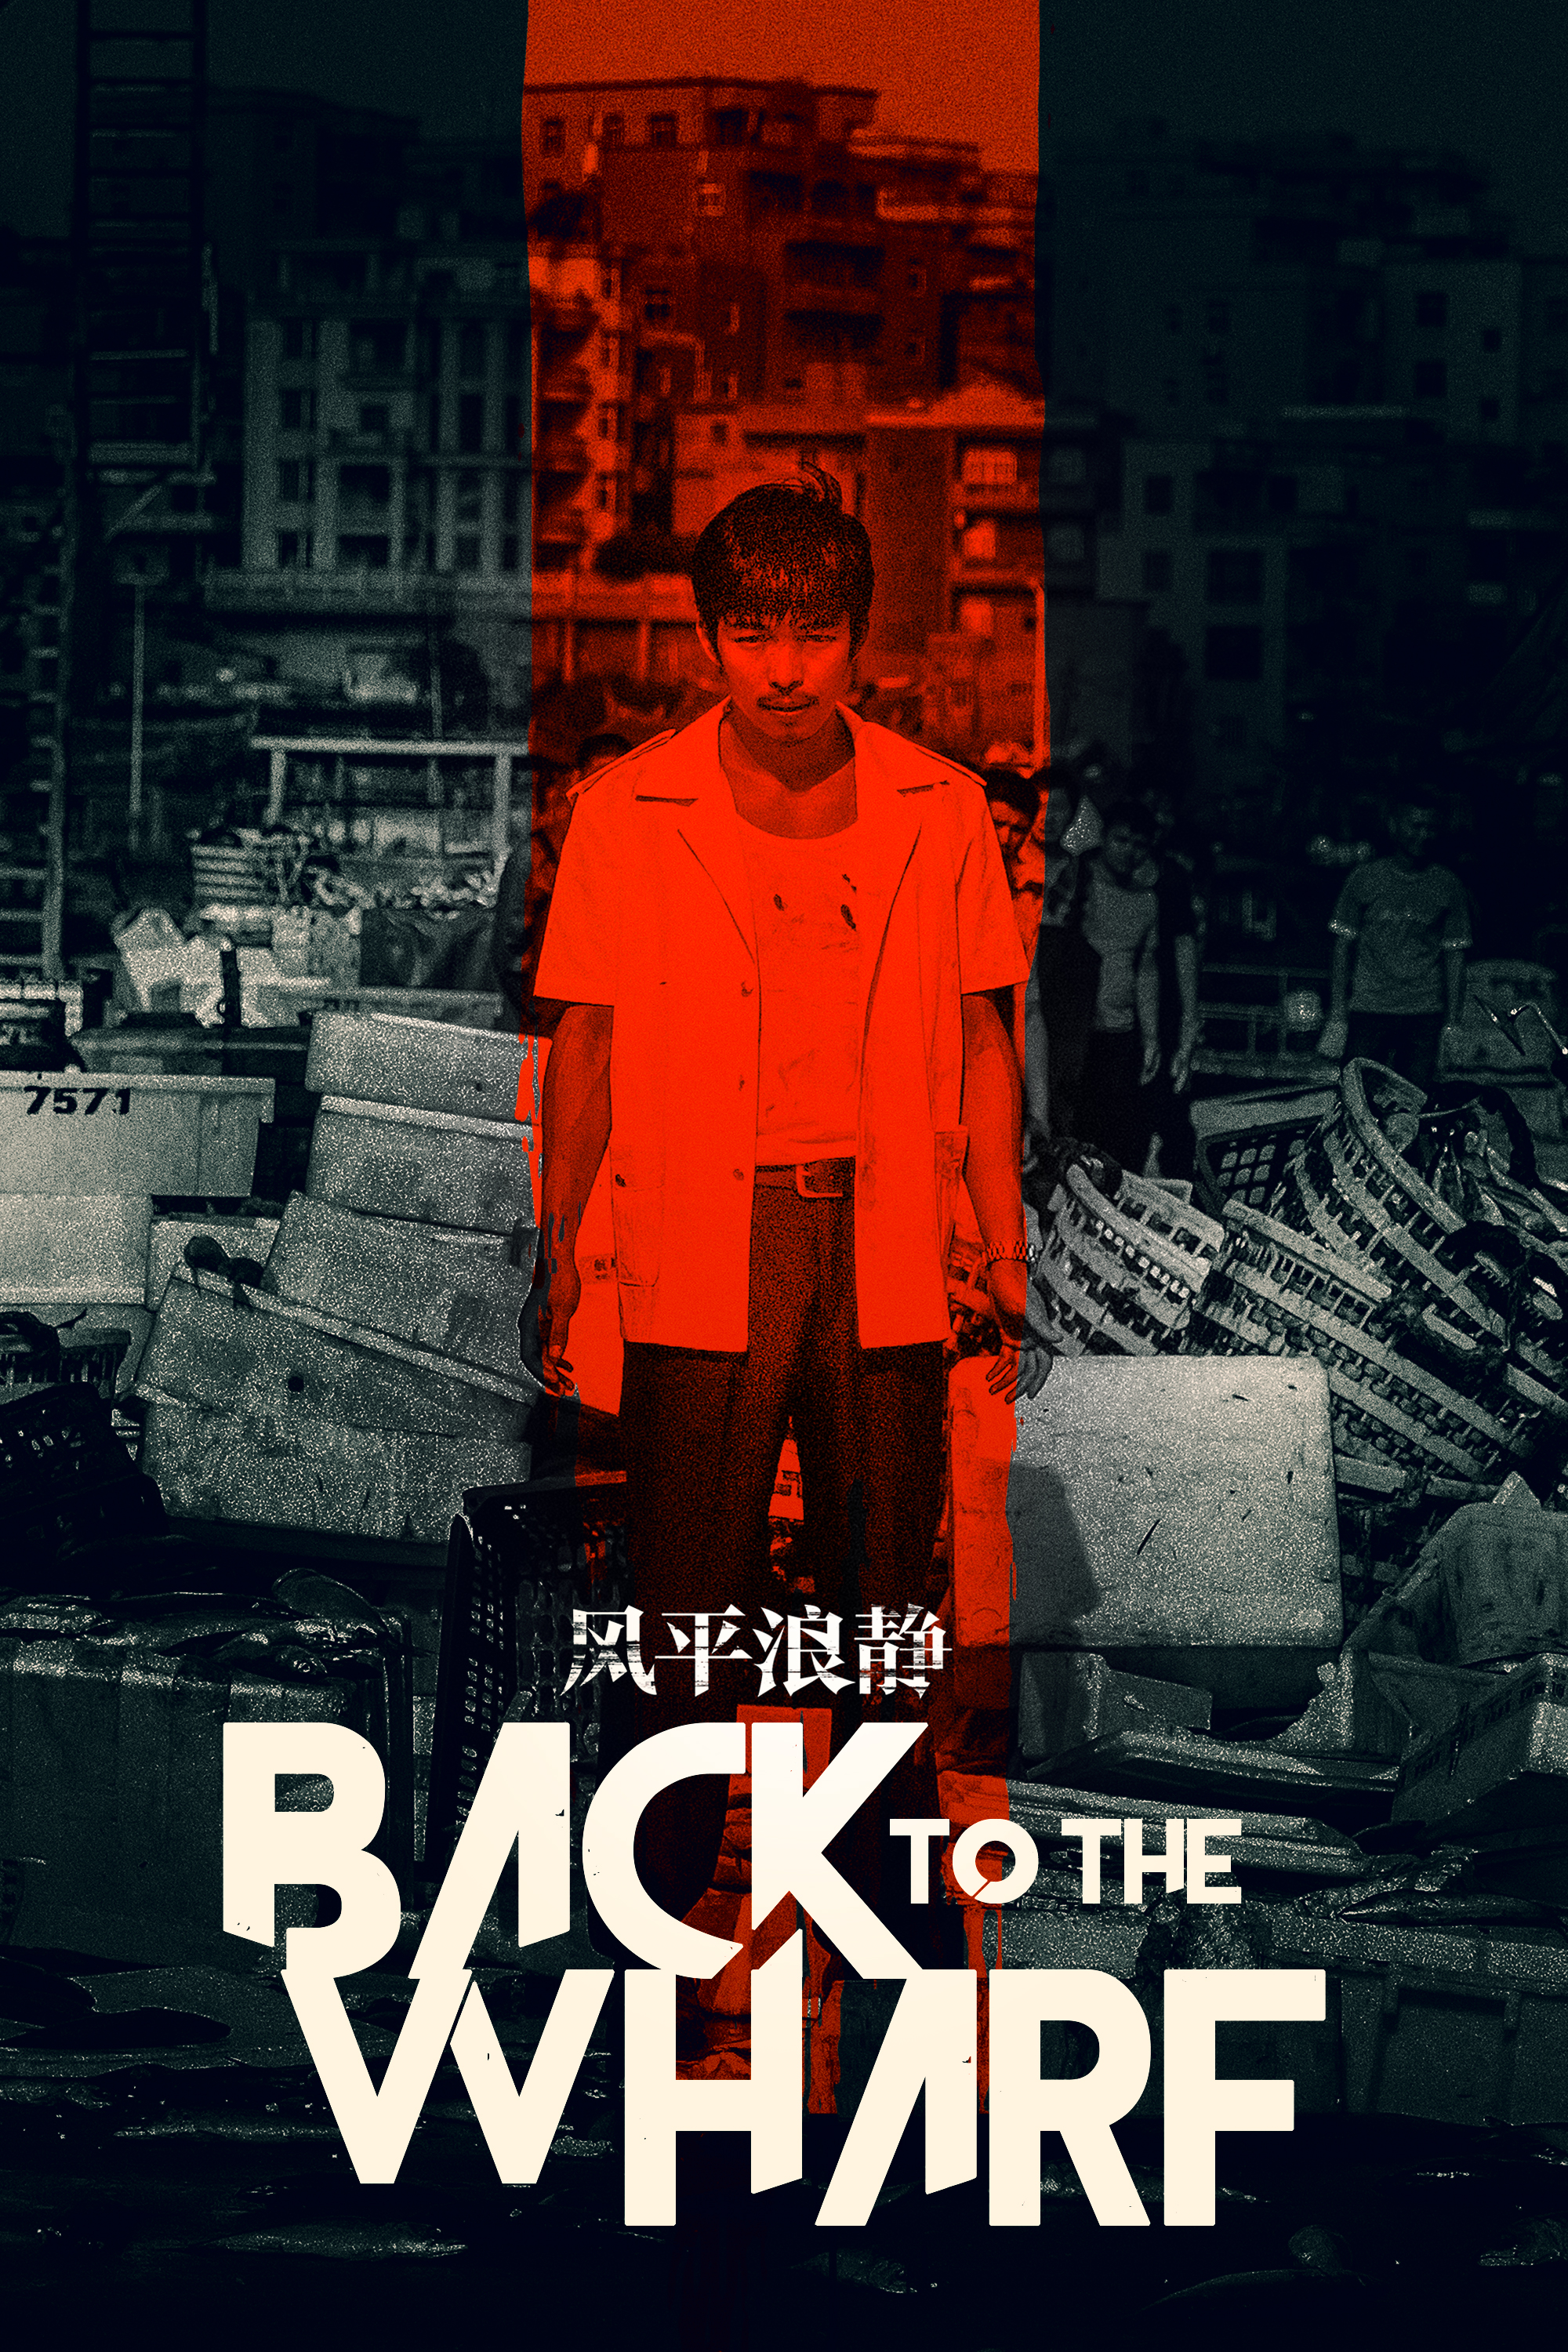 BACK TO THE WHARF Find The Chinese Crime Drama on North American VOD January 17th